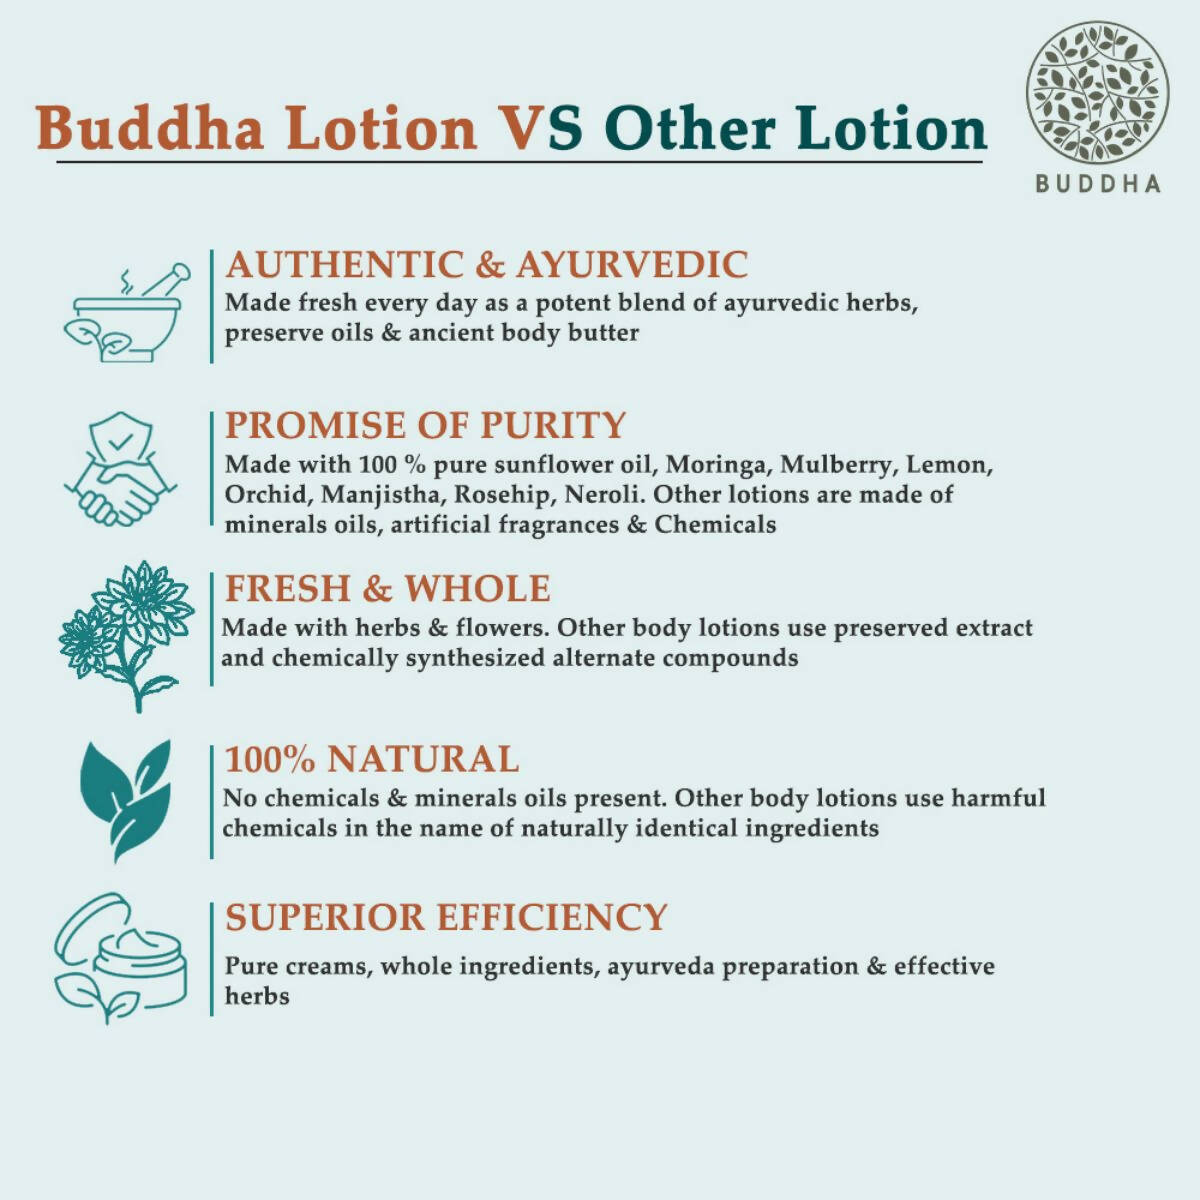 Buddha Natural Anti Oily Body Lotion - Helps To Balance The Skin's Natural Oil Levels